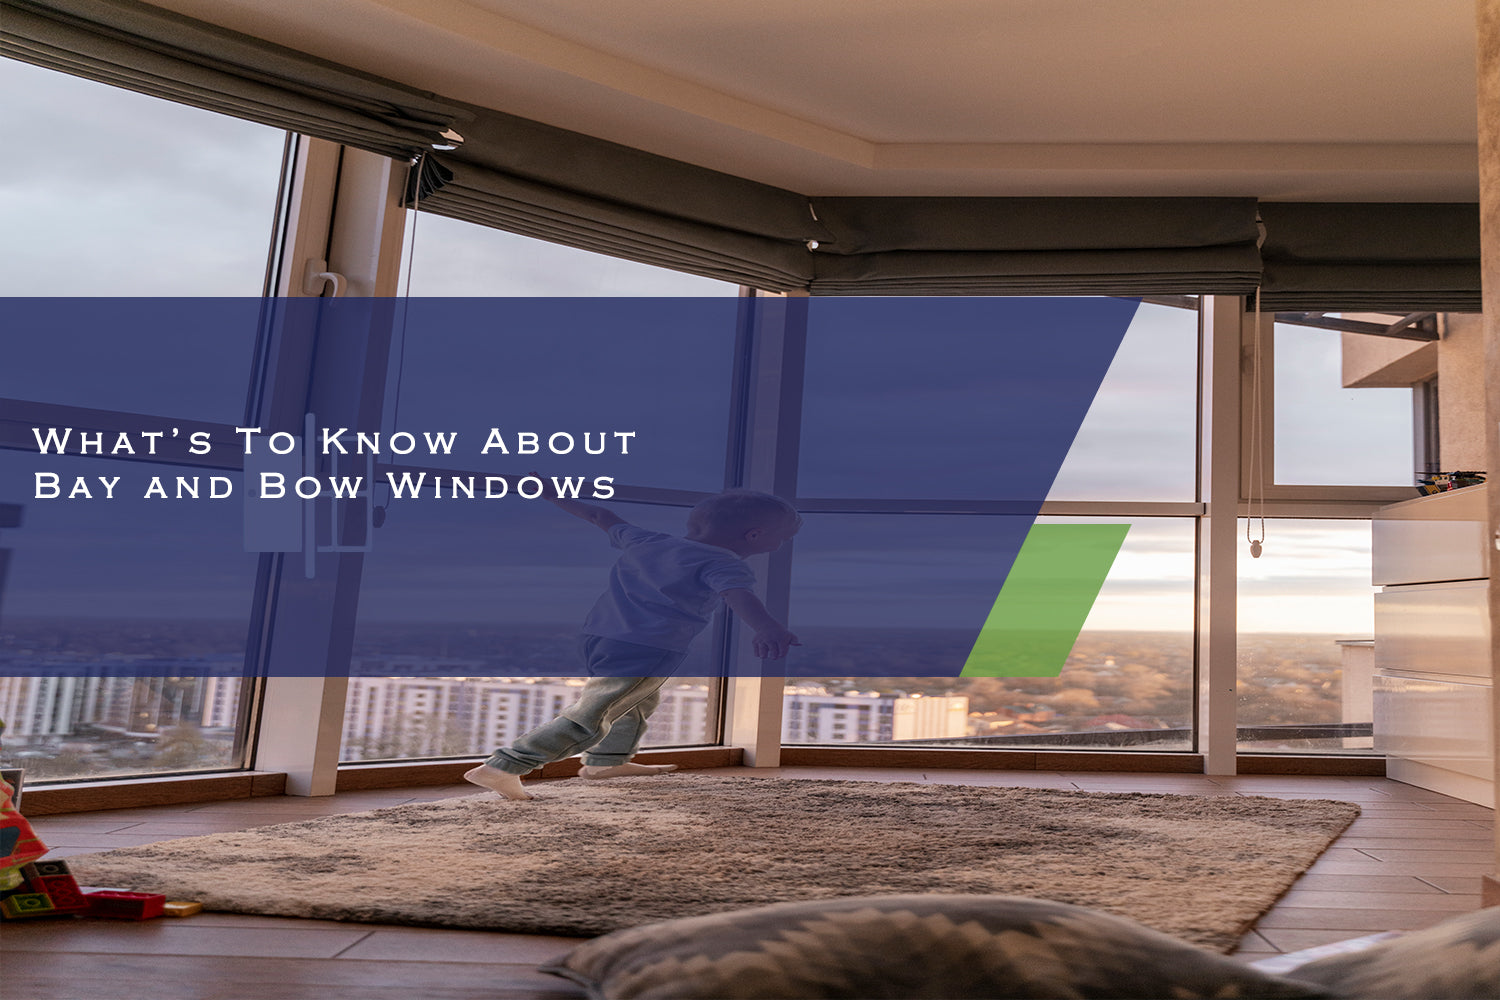 What’s To Know About Bay and Bow Windows